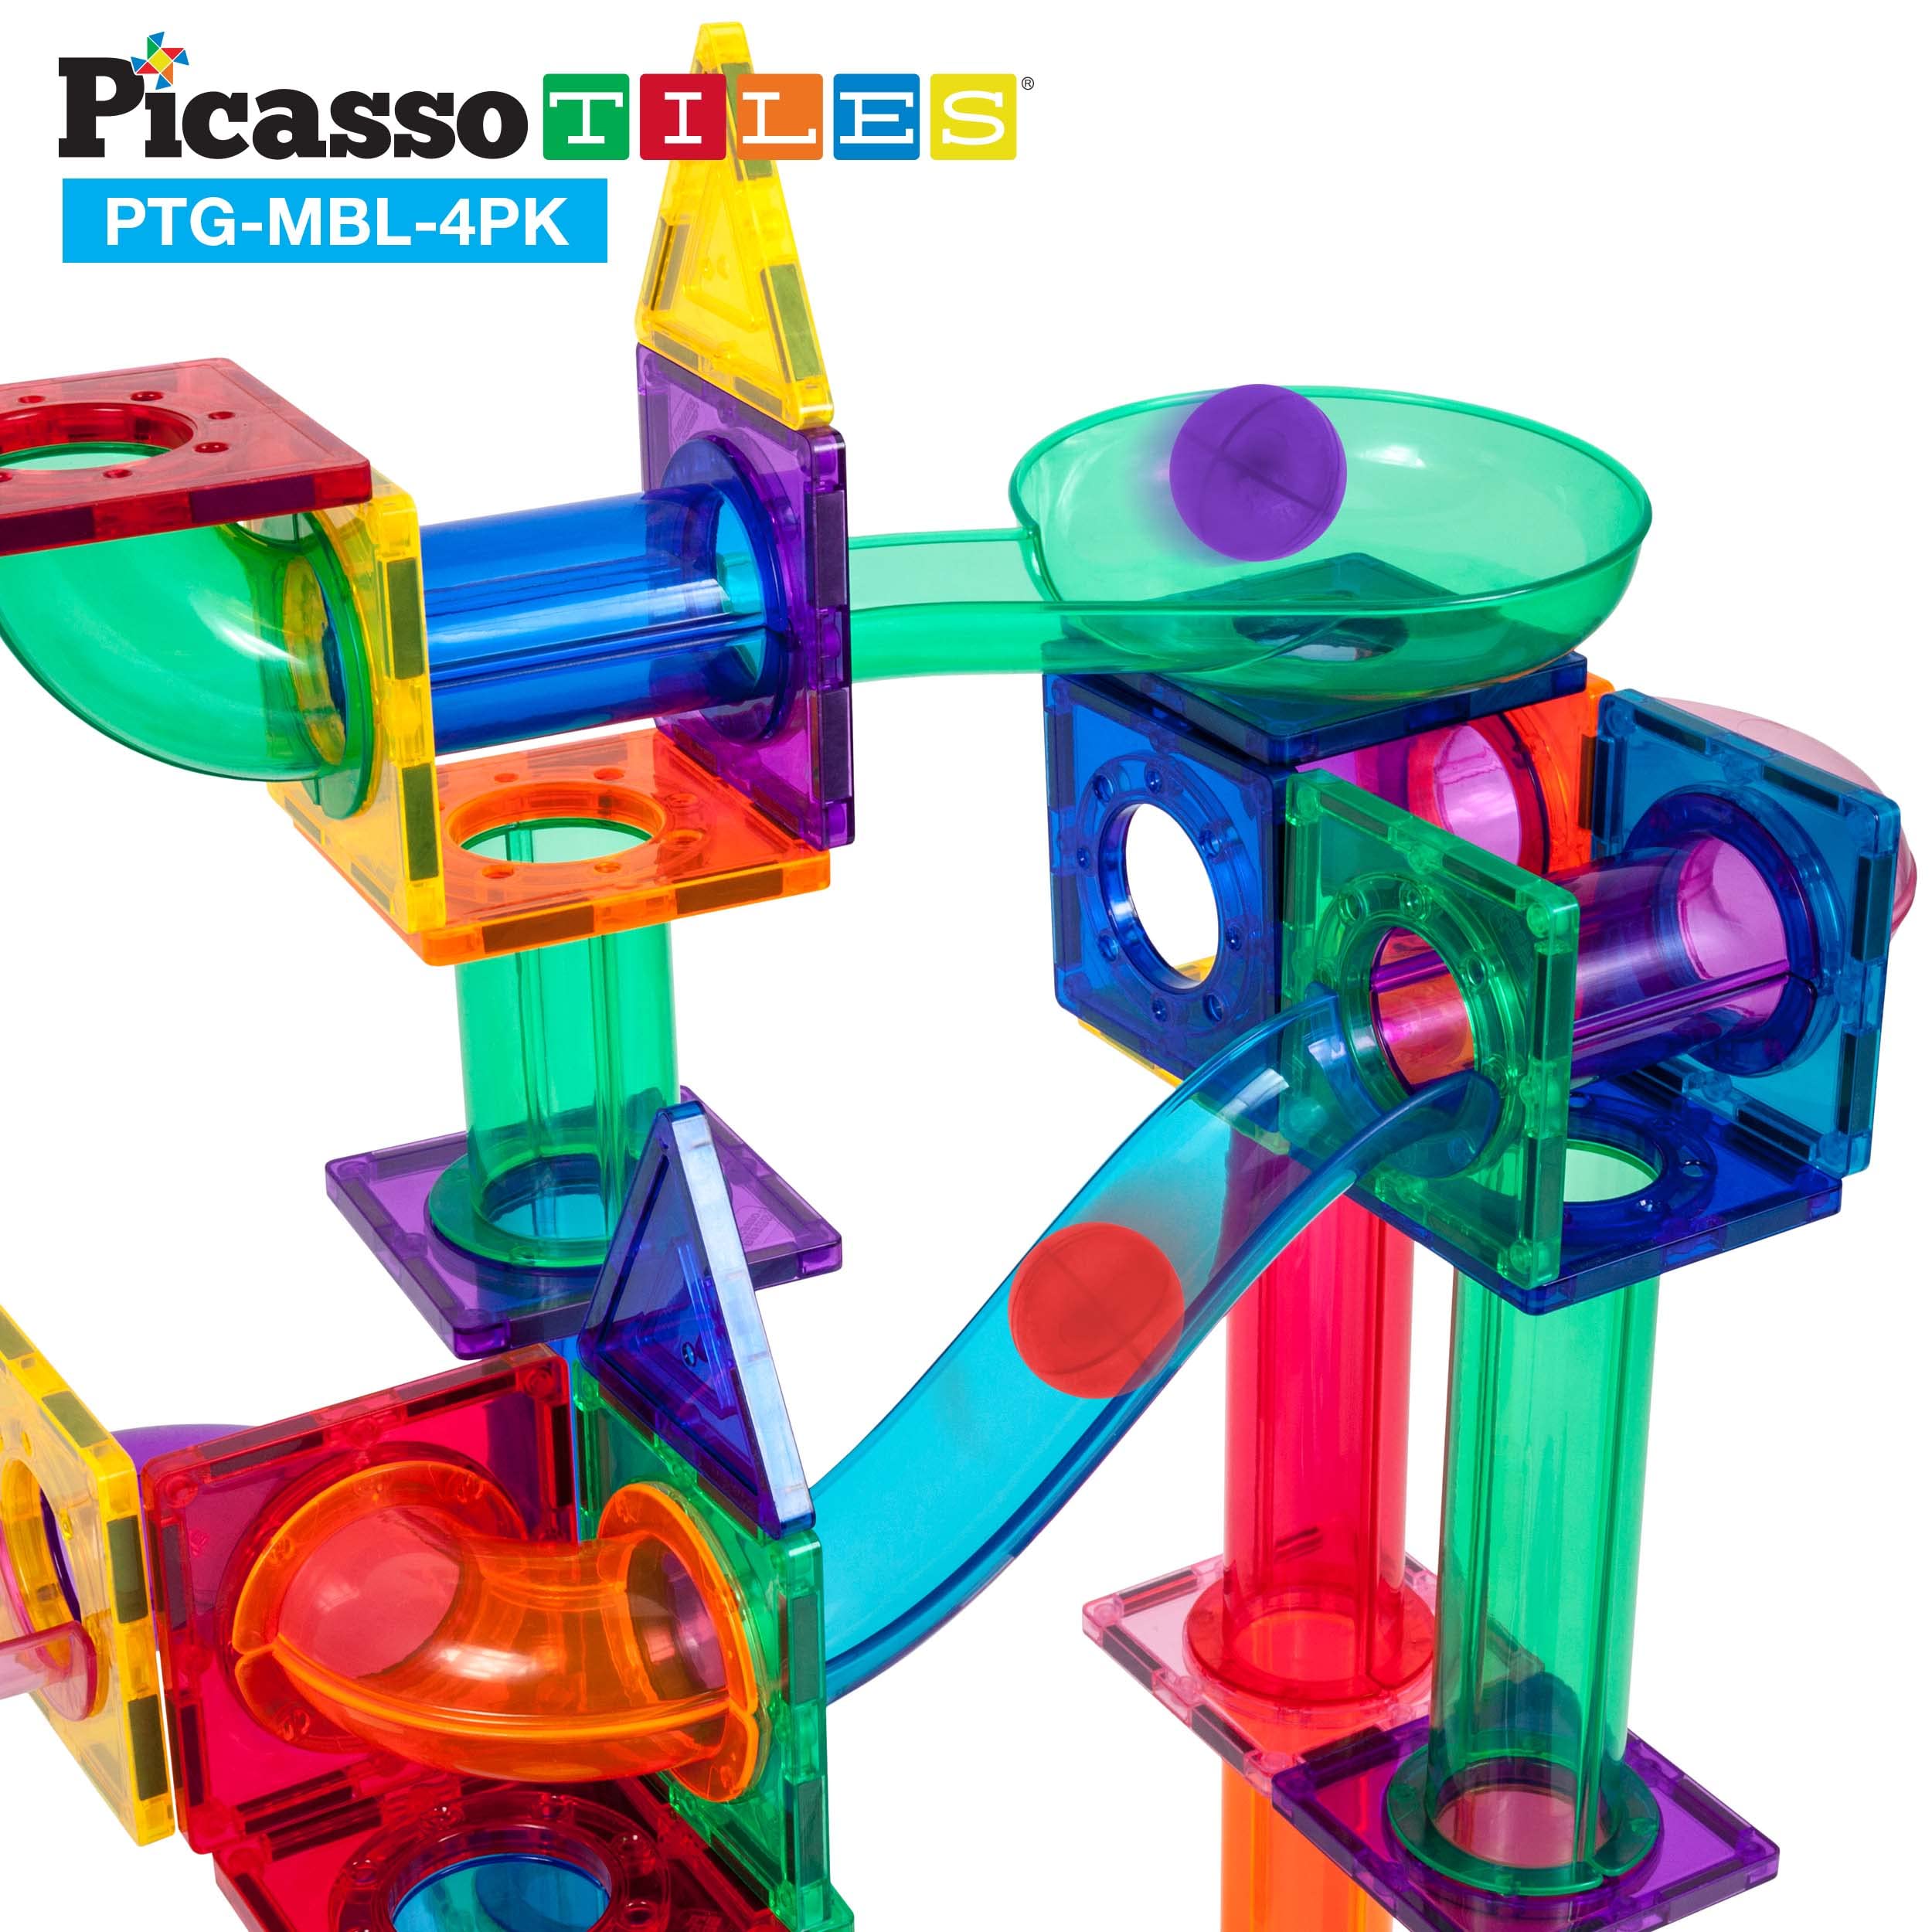 PicassoTiles 4pc Marbles for Magnetic Block Tiles Marble Run Race Track Magnet Building Tile Blocks Racetrack Maze Construction Toys Creative Toy Girls Boys 3 and Up Early Education STEM Learning Kit